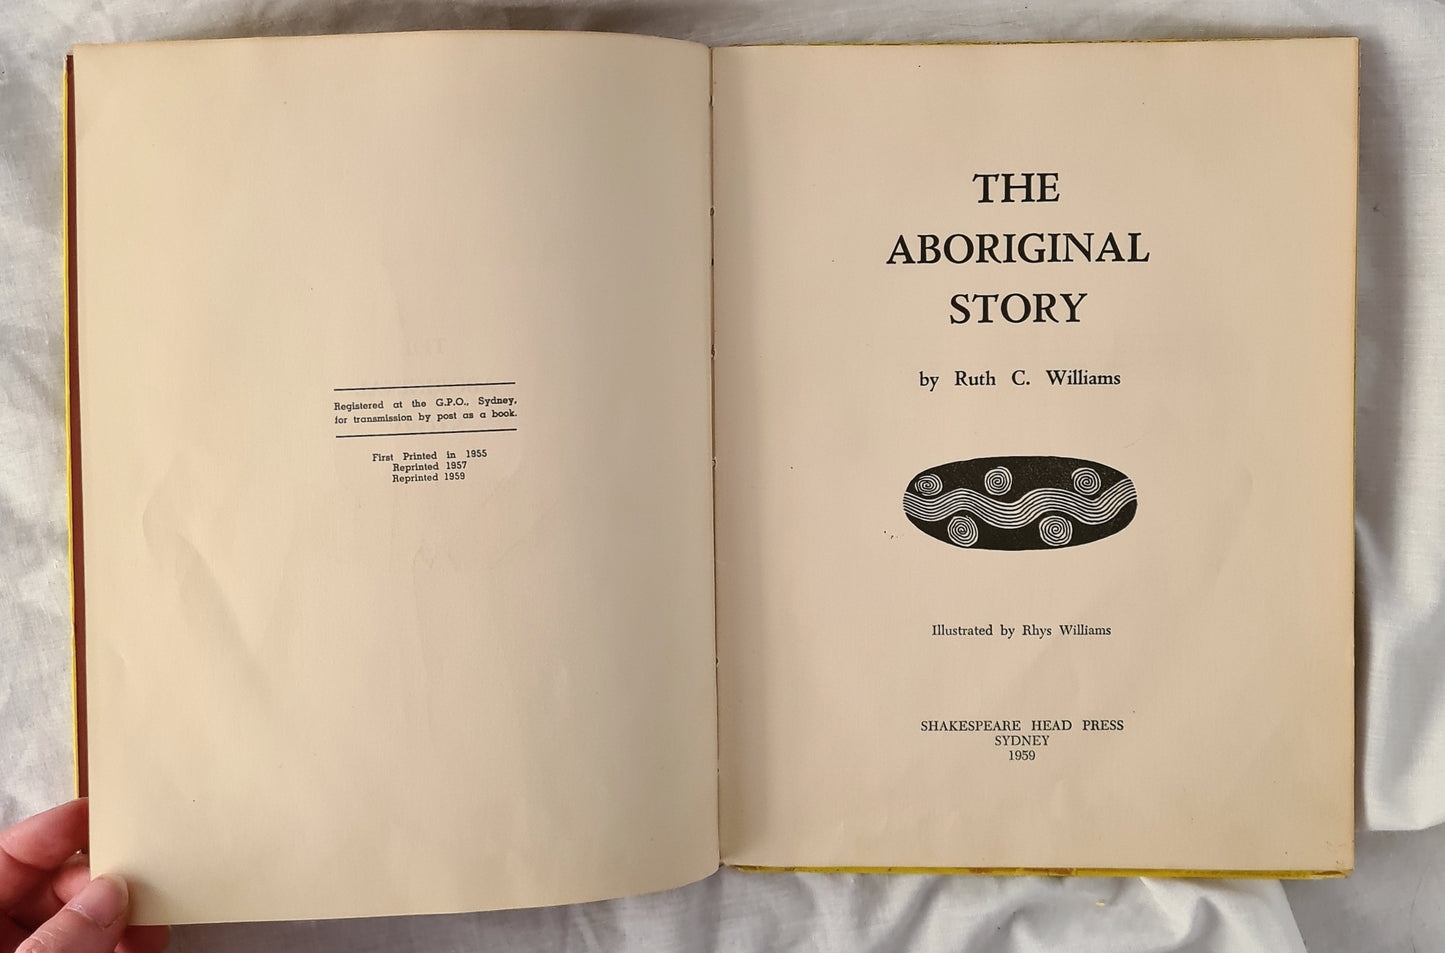 The Aboriginal Story by Ruth C. Williams